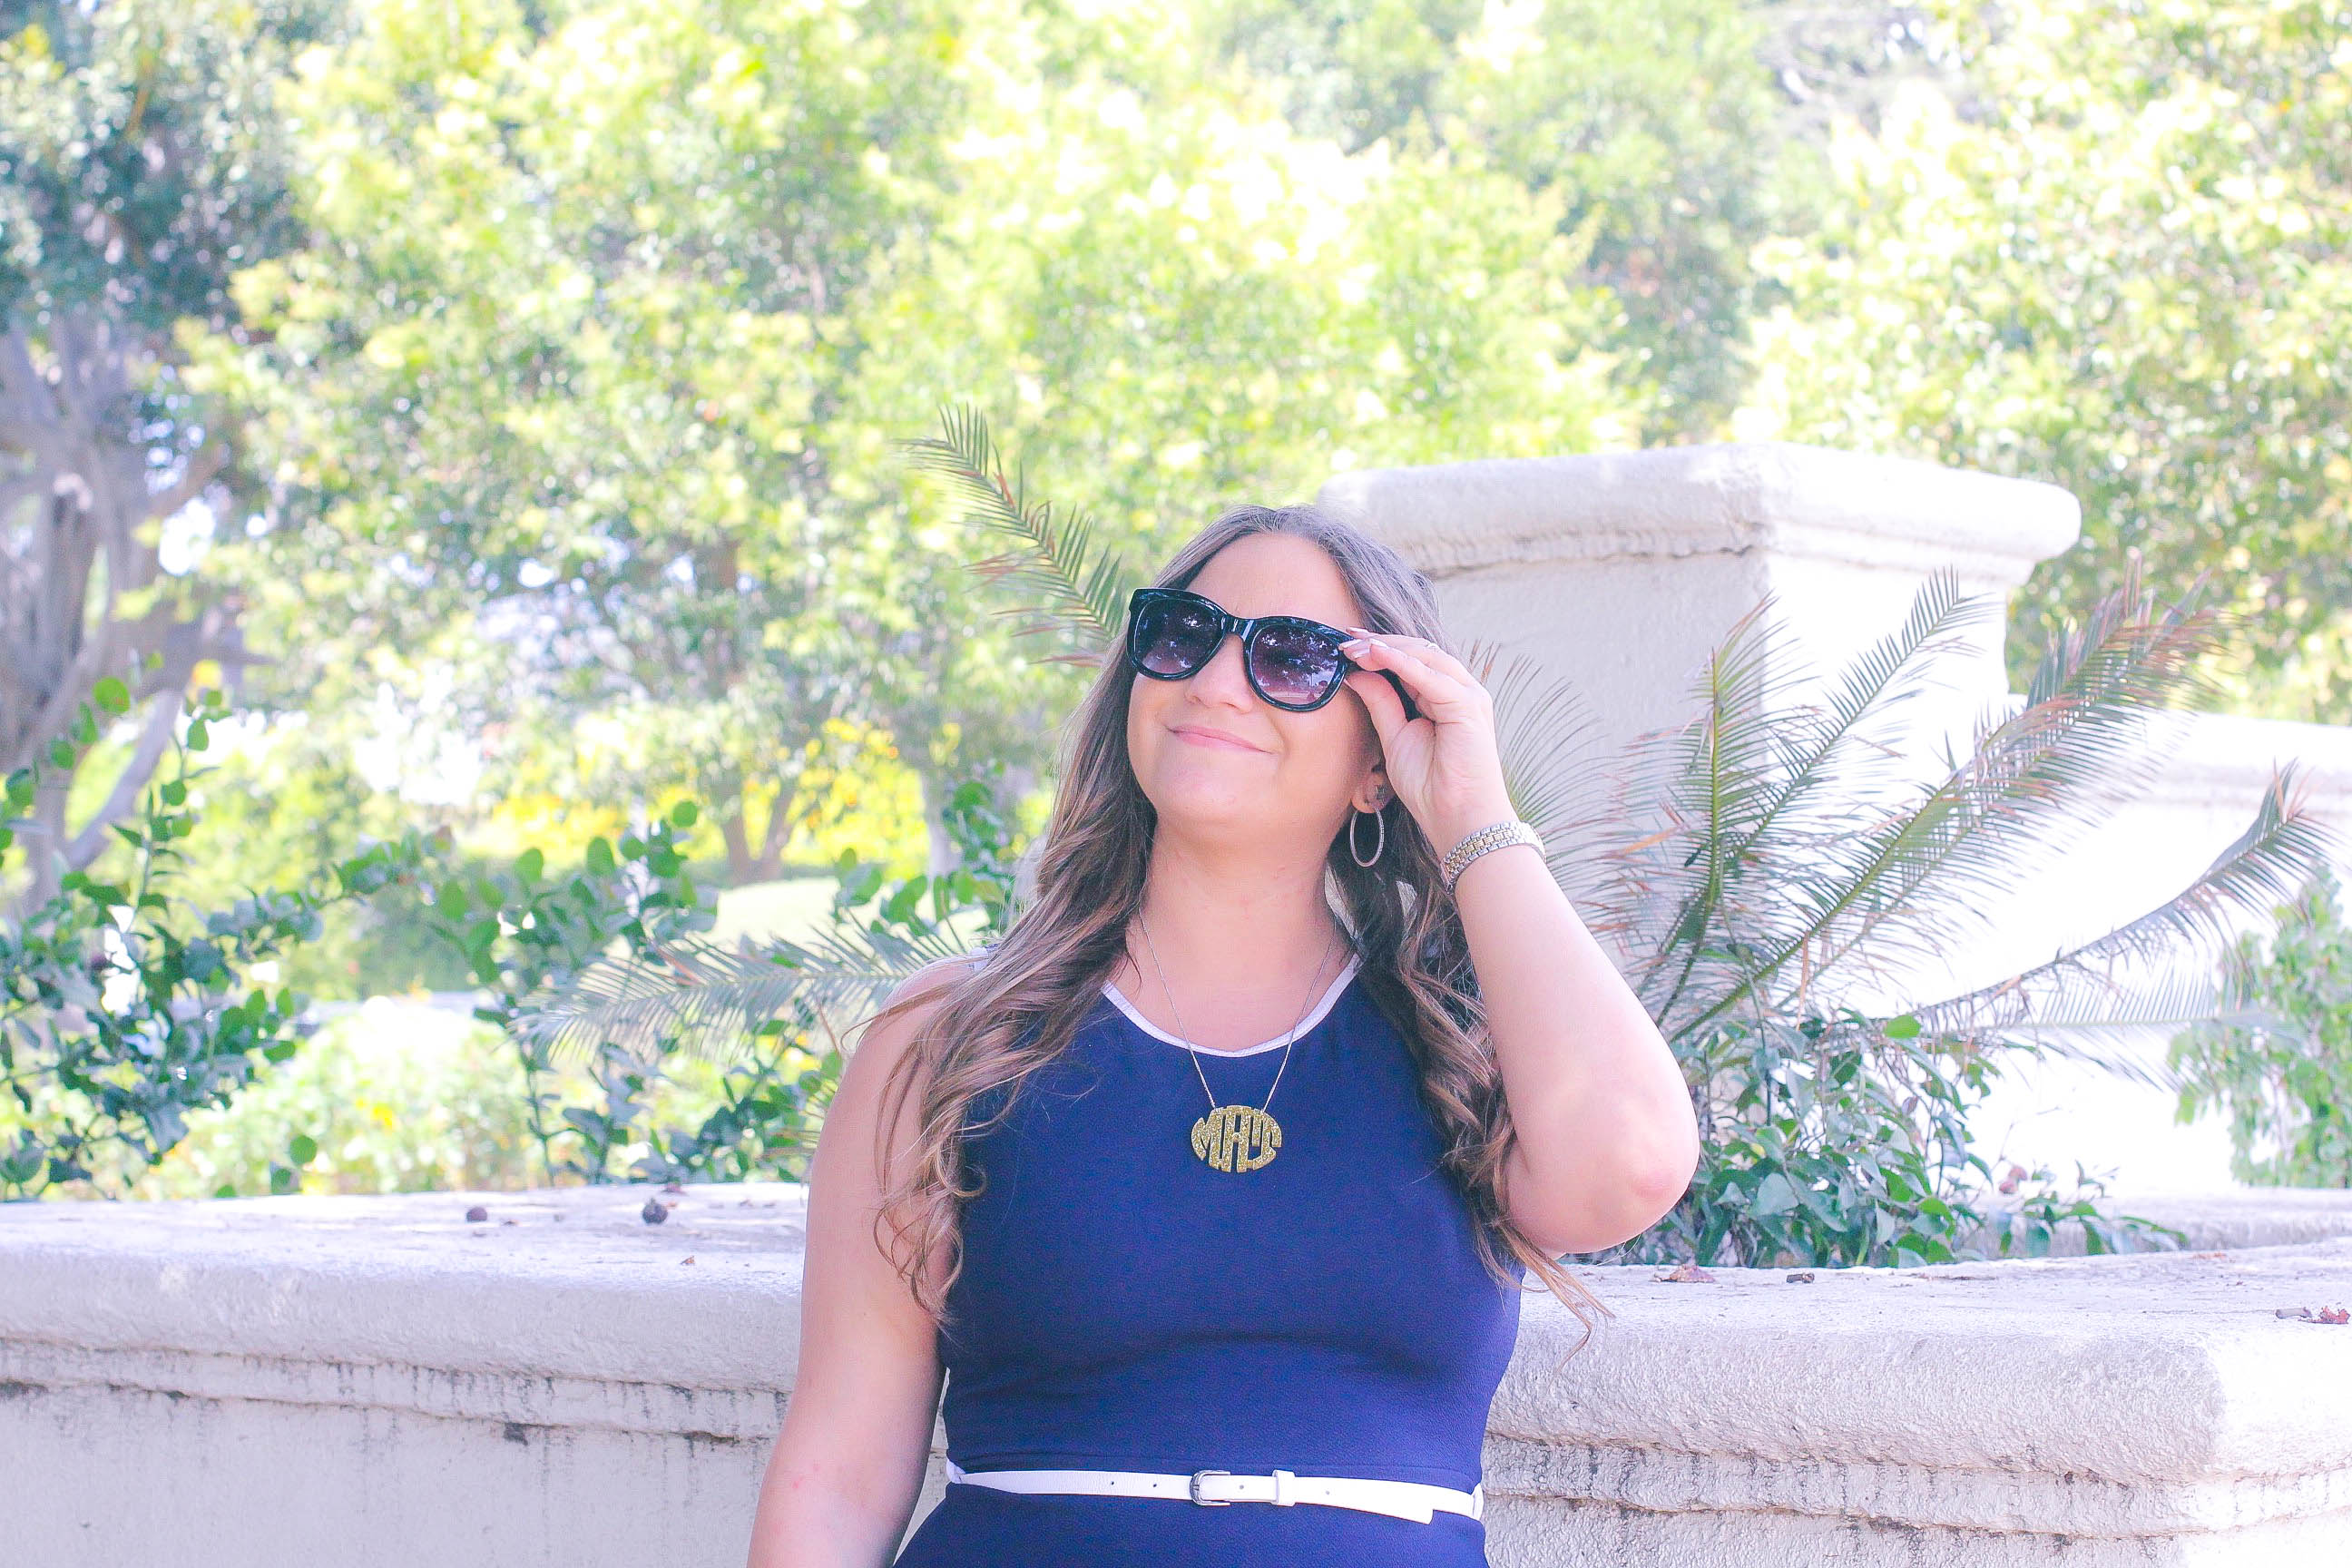 missyonmadison, missy on madison instagram, melissa tierney, la blogger, fashion blogger, style blogger, beverly hills, beverly hills style, navy aline dress, navy blue a line dress, navy blue and white a line dress, nautical dress, lacoste tote bag, lacoste satchel, navy lacoste bag, monogram necklace, black wayfarer sunglasses, white pointed toe pumps, white pumps, spring style, what to wear for an interview, spring style for work, office style, blue a line dress, white skinny belt,